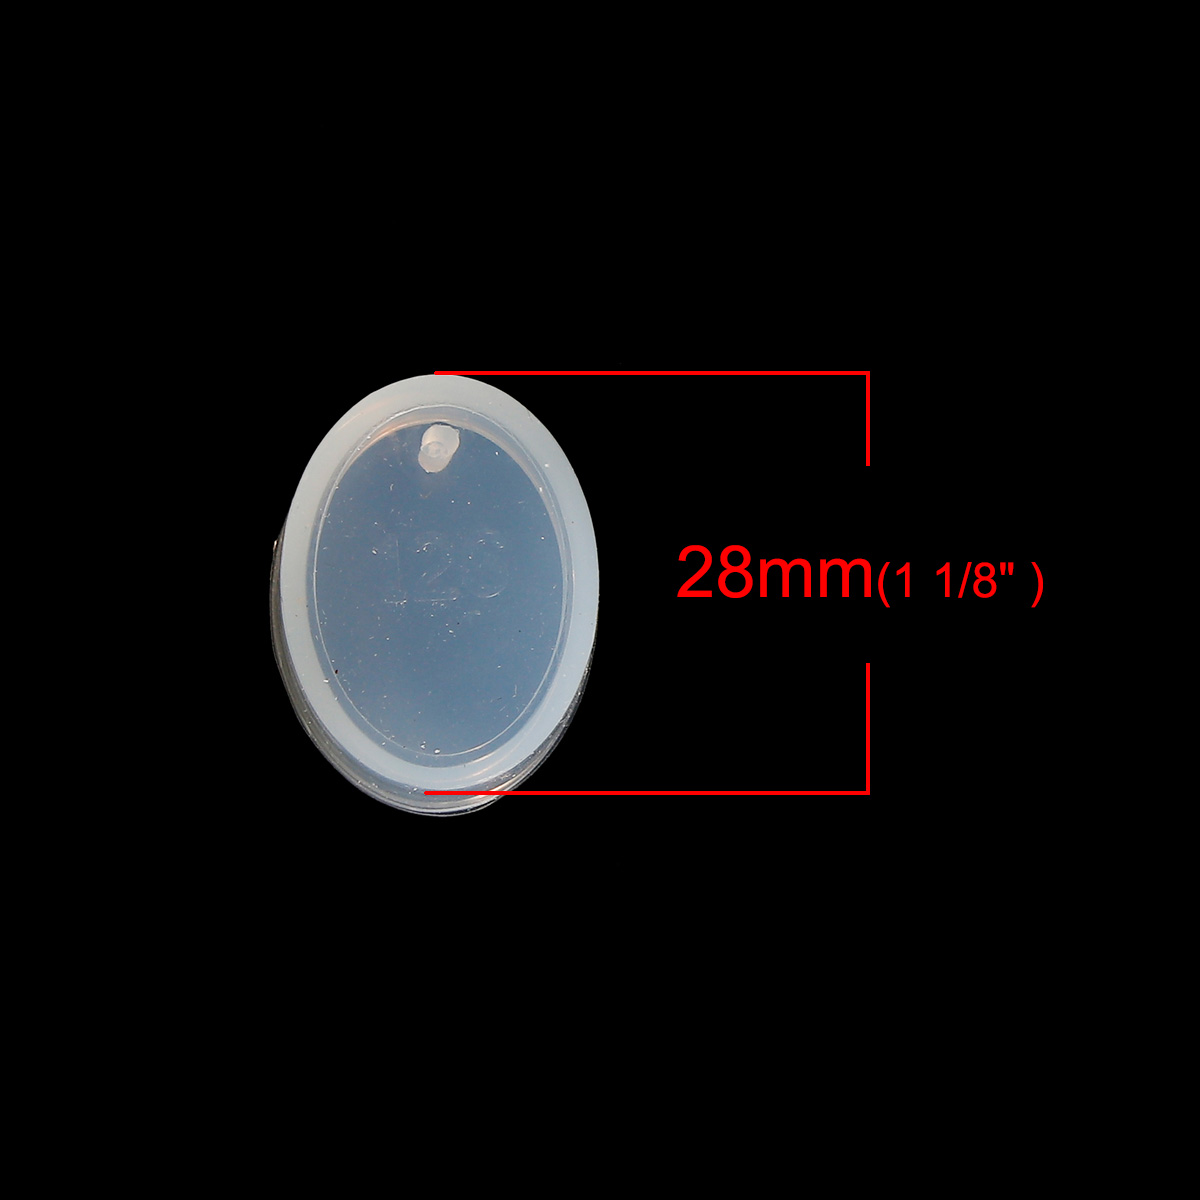 Picture of Silicone Resin Mold Oval White 28mm(1 1/8") x 21mm( 7/8"), 1 Piece